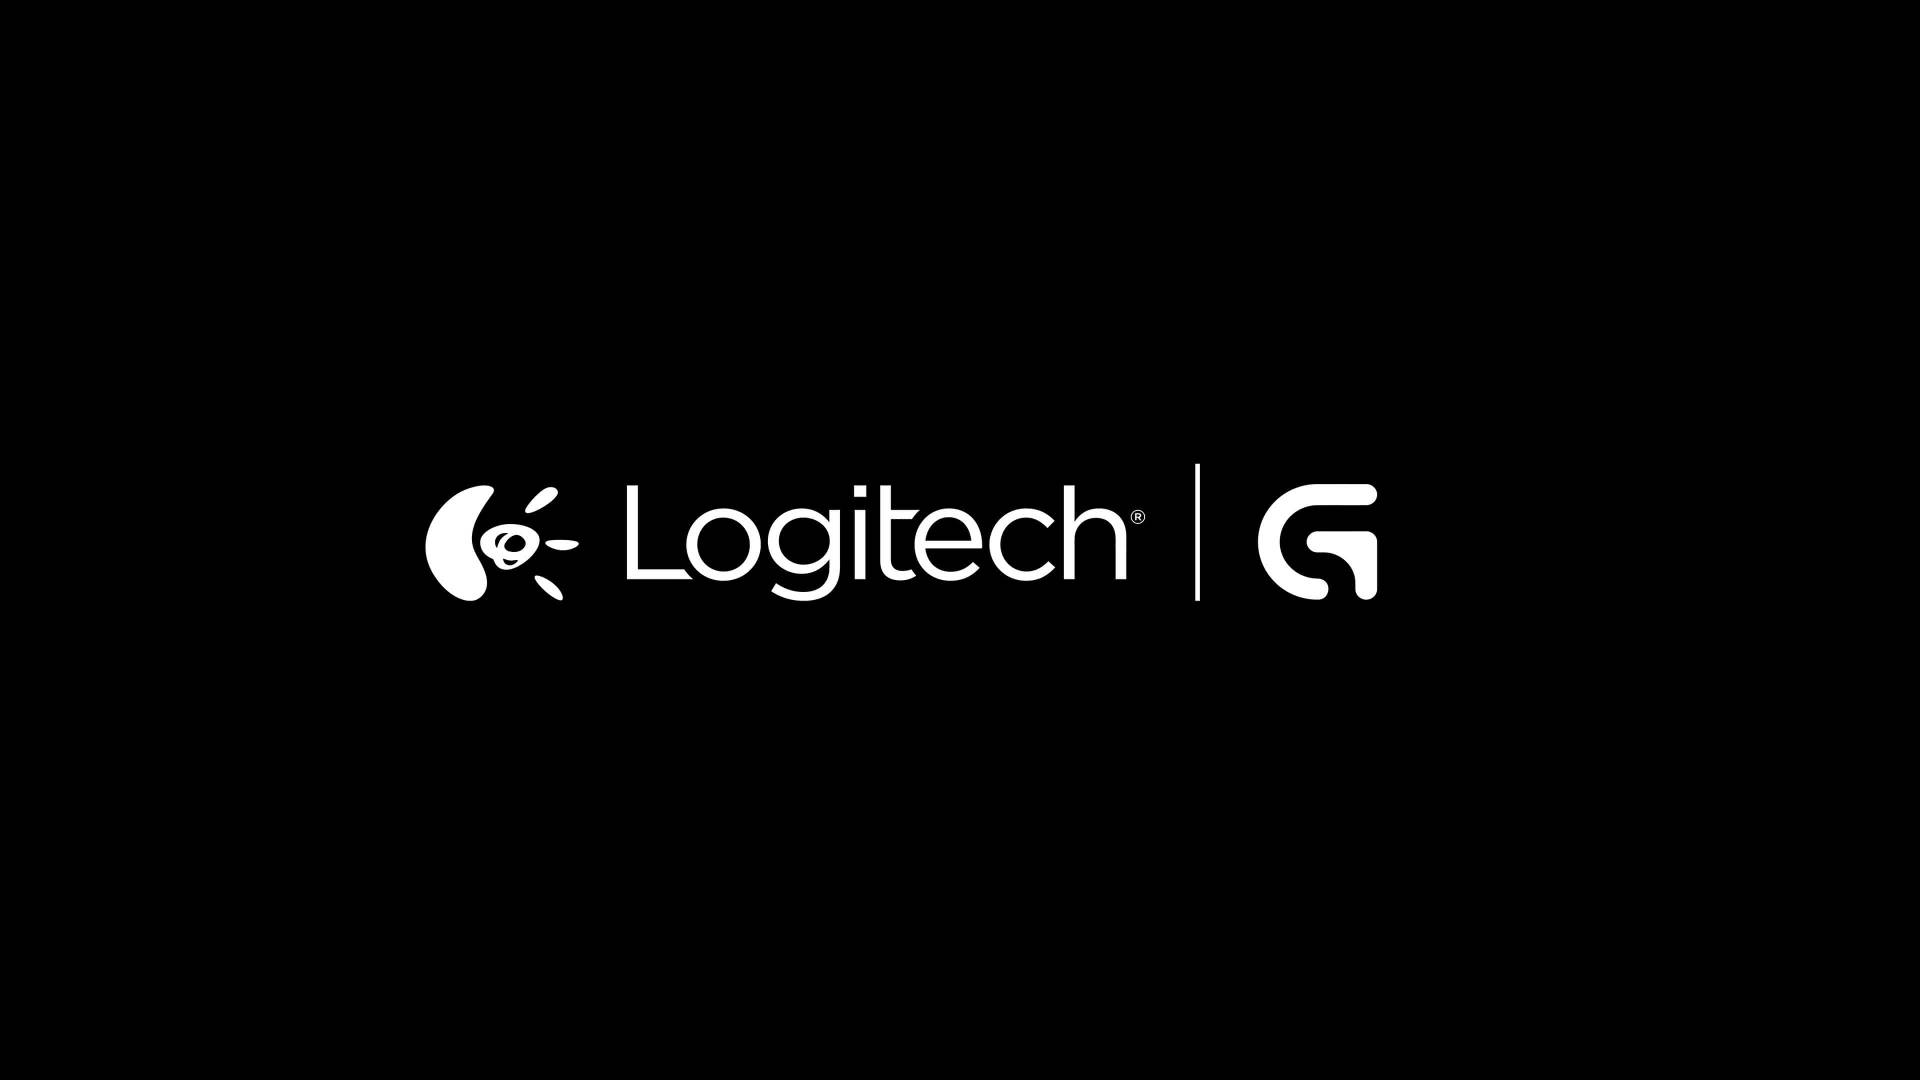 Free Downloads, [100+] Logitech Wallpapers for | Wallpapers.com